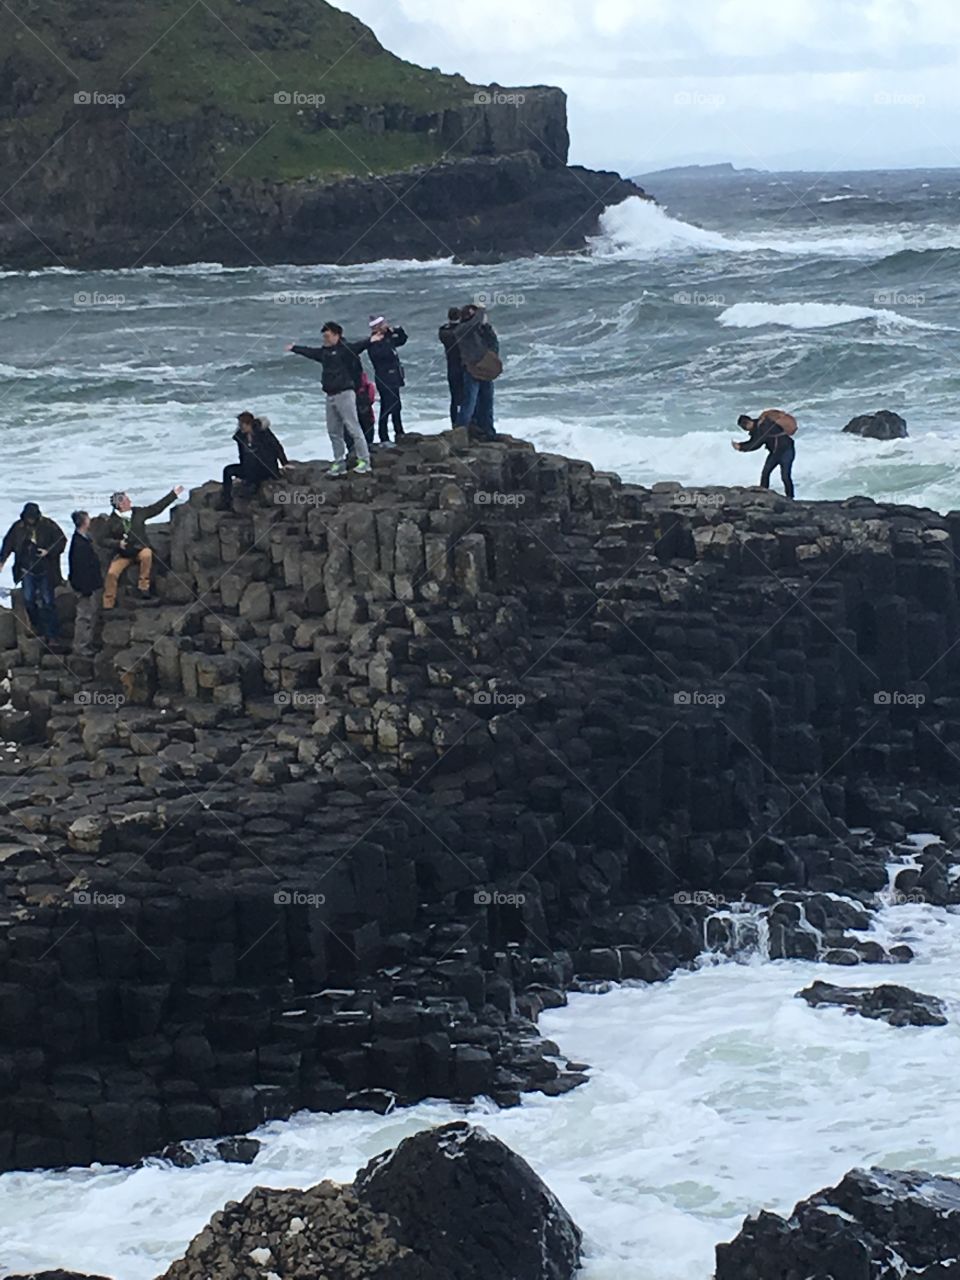 A far-away view of tourists taking pictures at Giant’s Causeway in Northern Ireland 